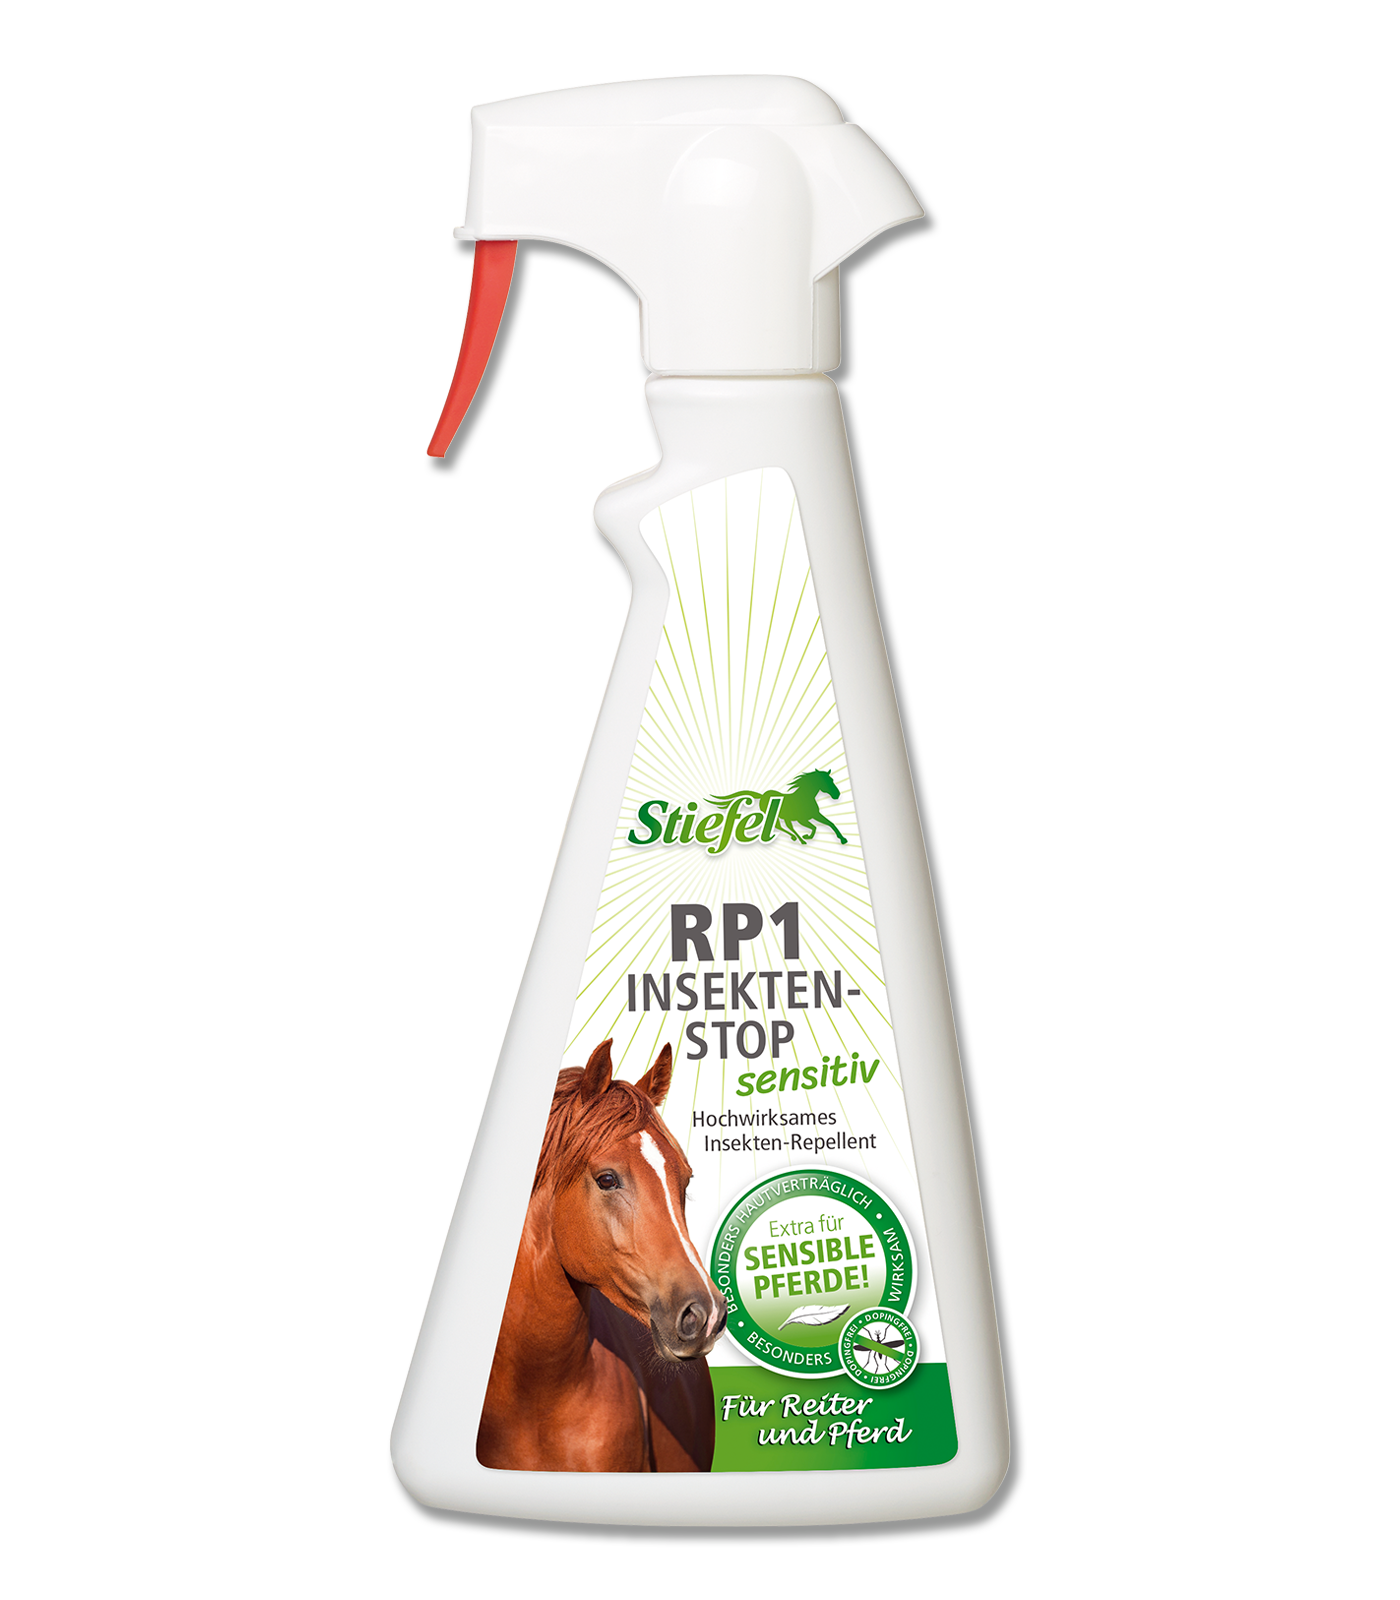 Stiefel RP1 INSECT-STOP Sensitive, 500 ml